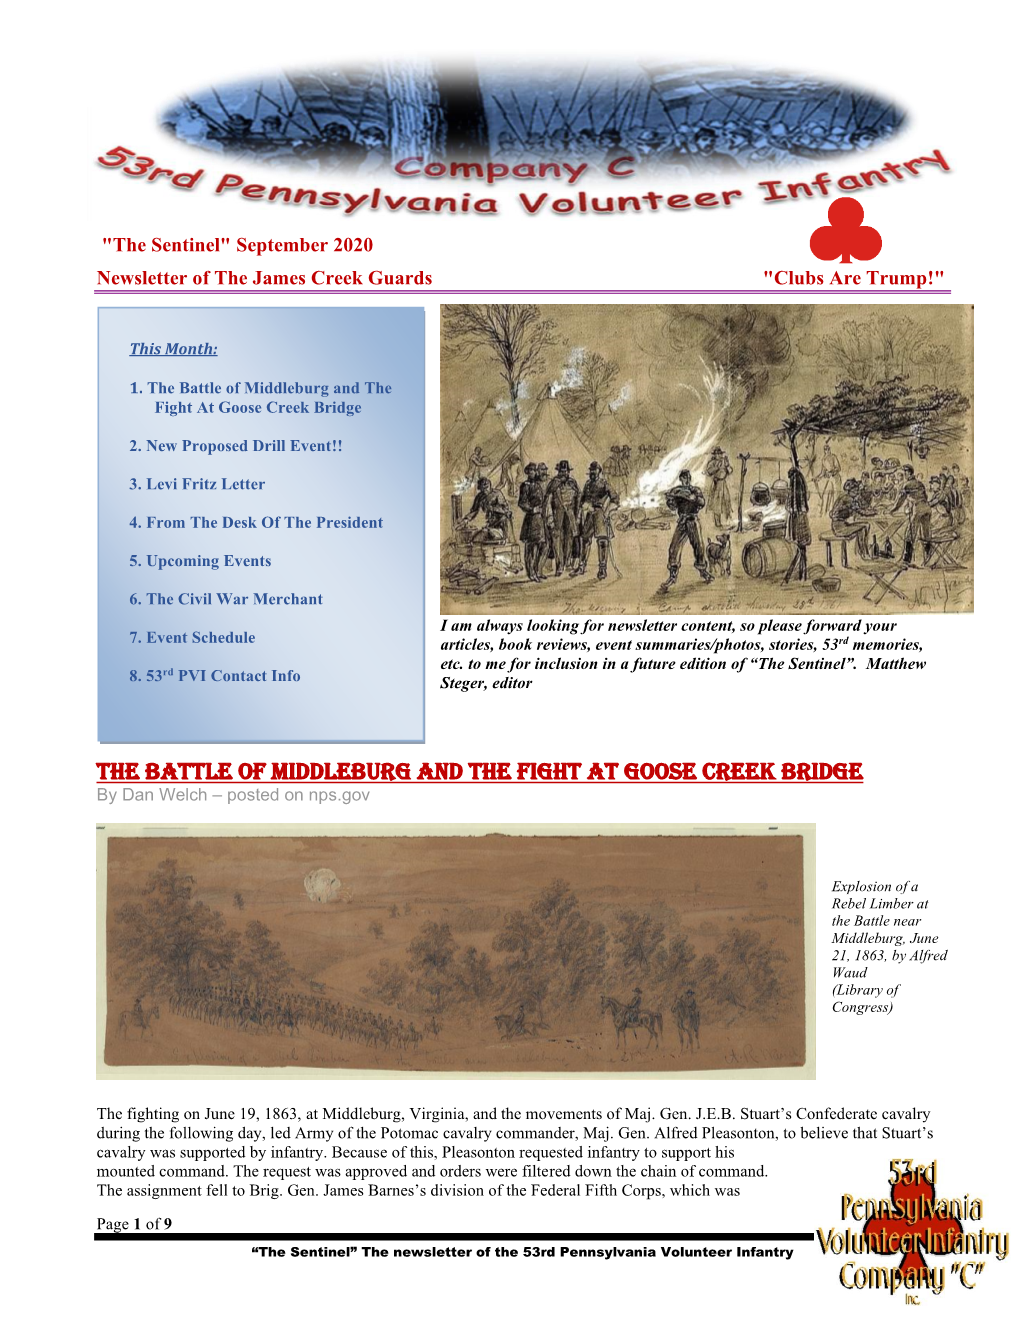 The Battle of Middleburg and the Fight at Goose Creek Bridge